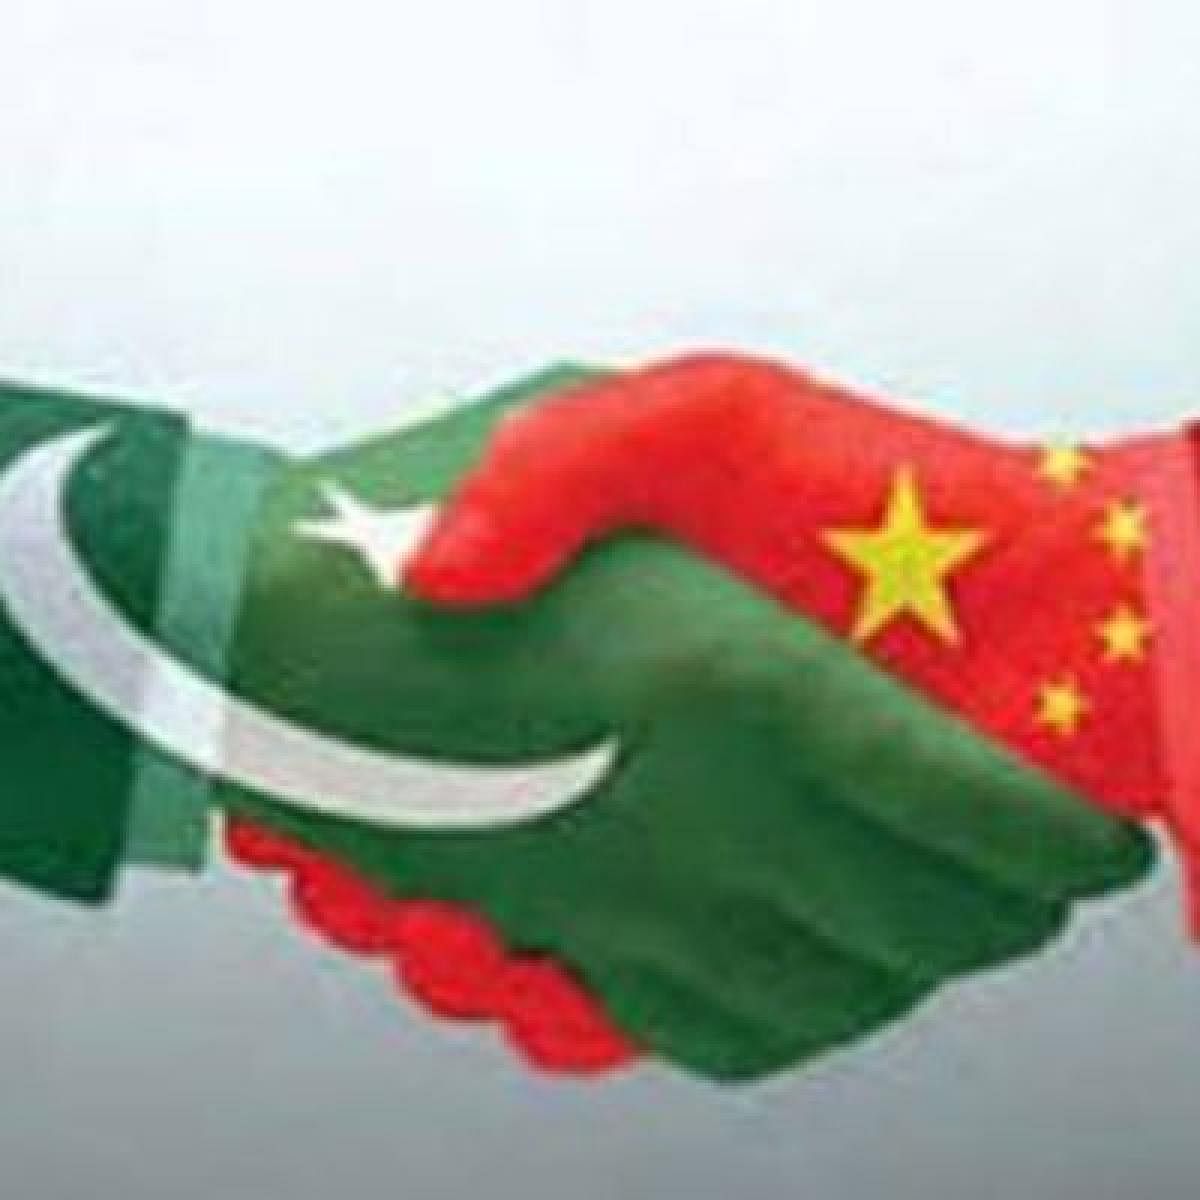 On Tuesday, China, on expected lines, praised Pakistan's counterterrorism record.